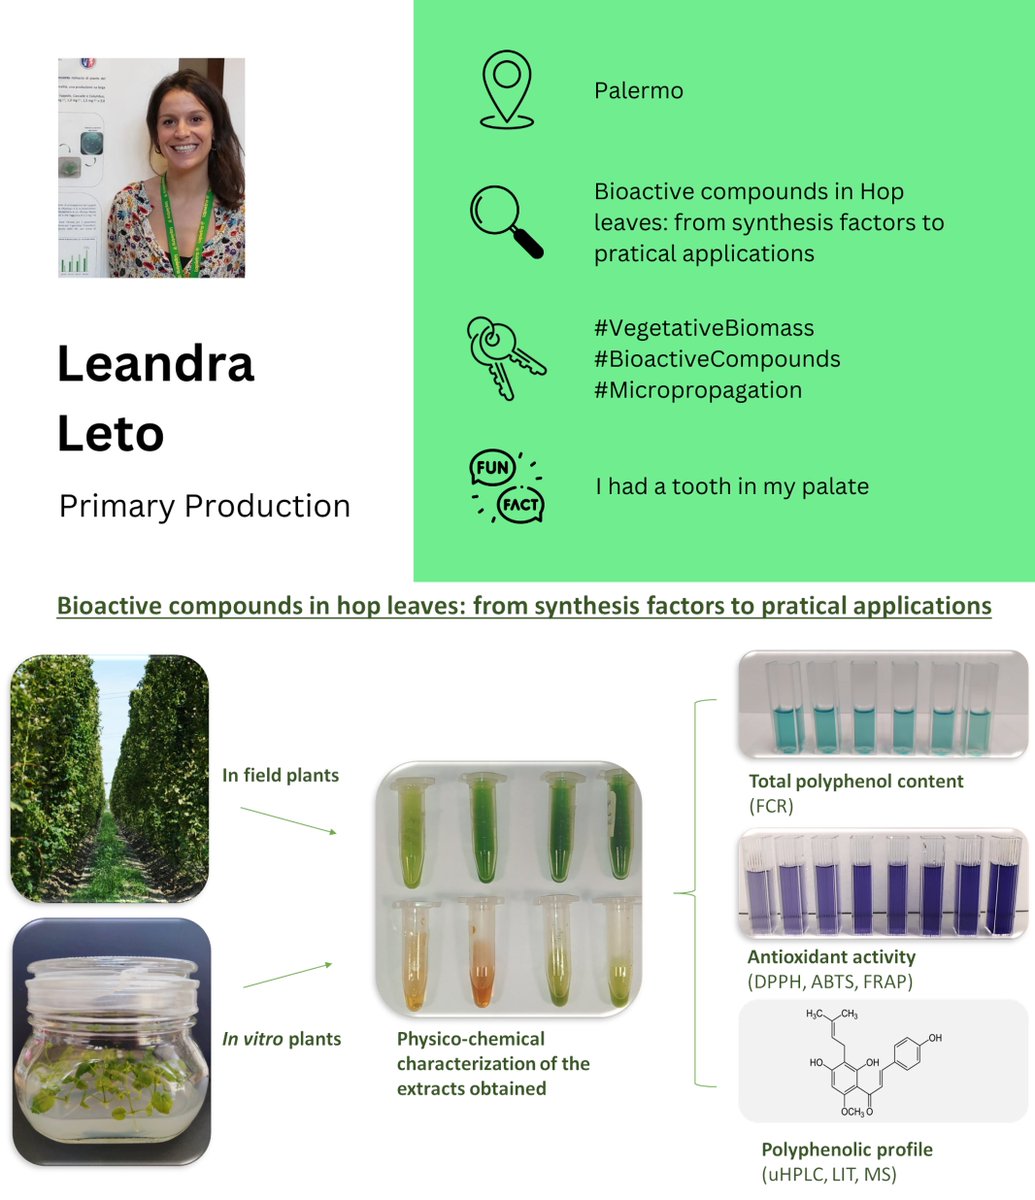 More PhDs from the 37° cycle are on the way!
Let's #MeetThePhD

👩‍🎓Leadra Leto
🟢Primary Production
🗝️#VegetativeBiomass #BioactiveCompounds #Micropropagation